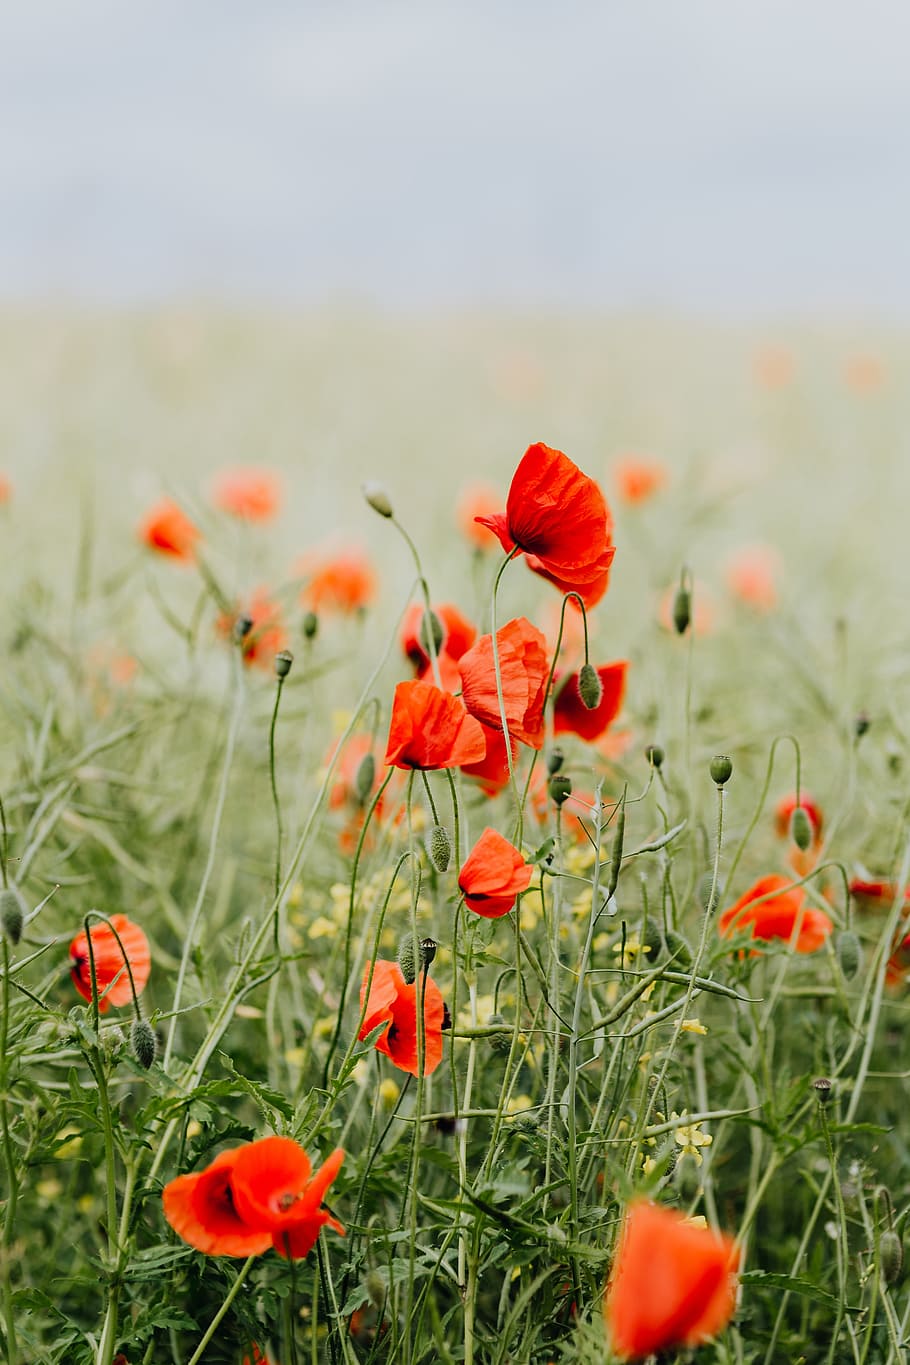 A field of Red Poppies, summer, flowers, green, nature, bloom